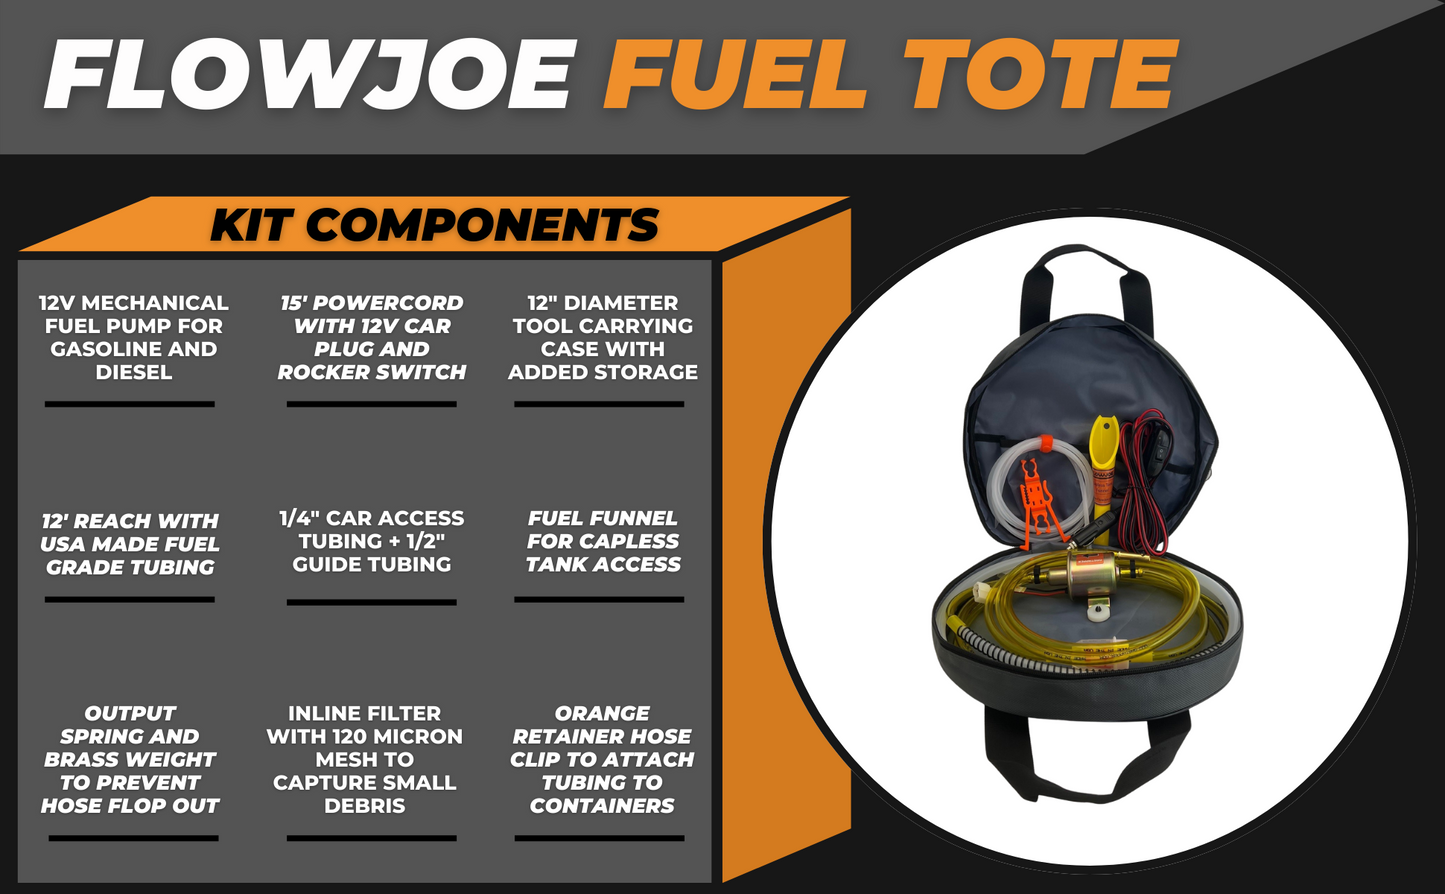 Fuel Tote components including fuel grade hose, brass weight, hose retainer clip and storage bag